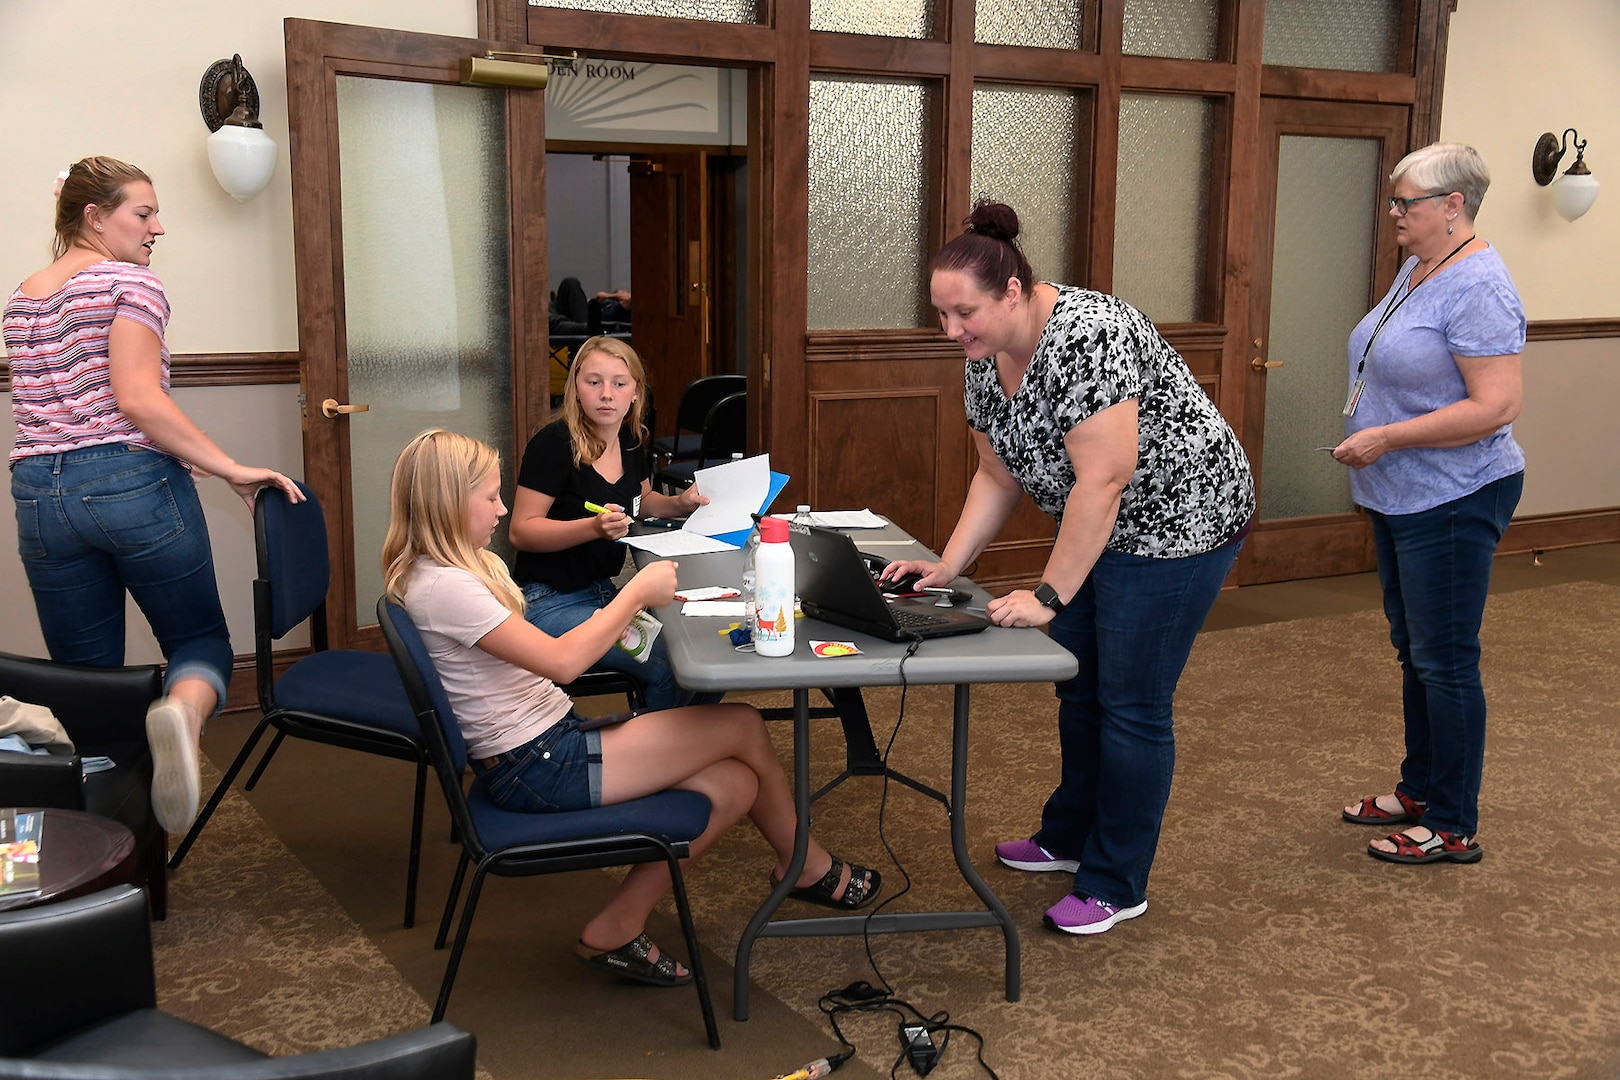 Volunteers check-in donors for their appointments at the Aug. 7 blood drive at the Hart-Dole-Inouye Federal Center.